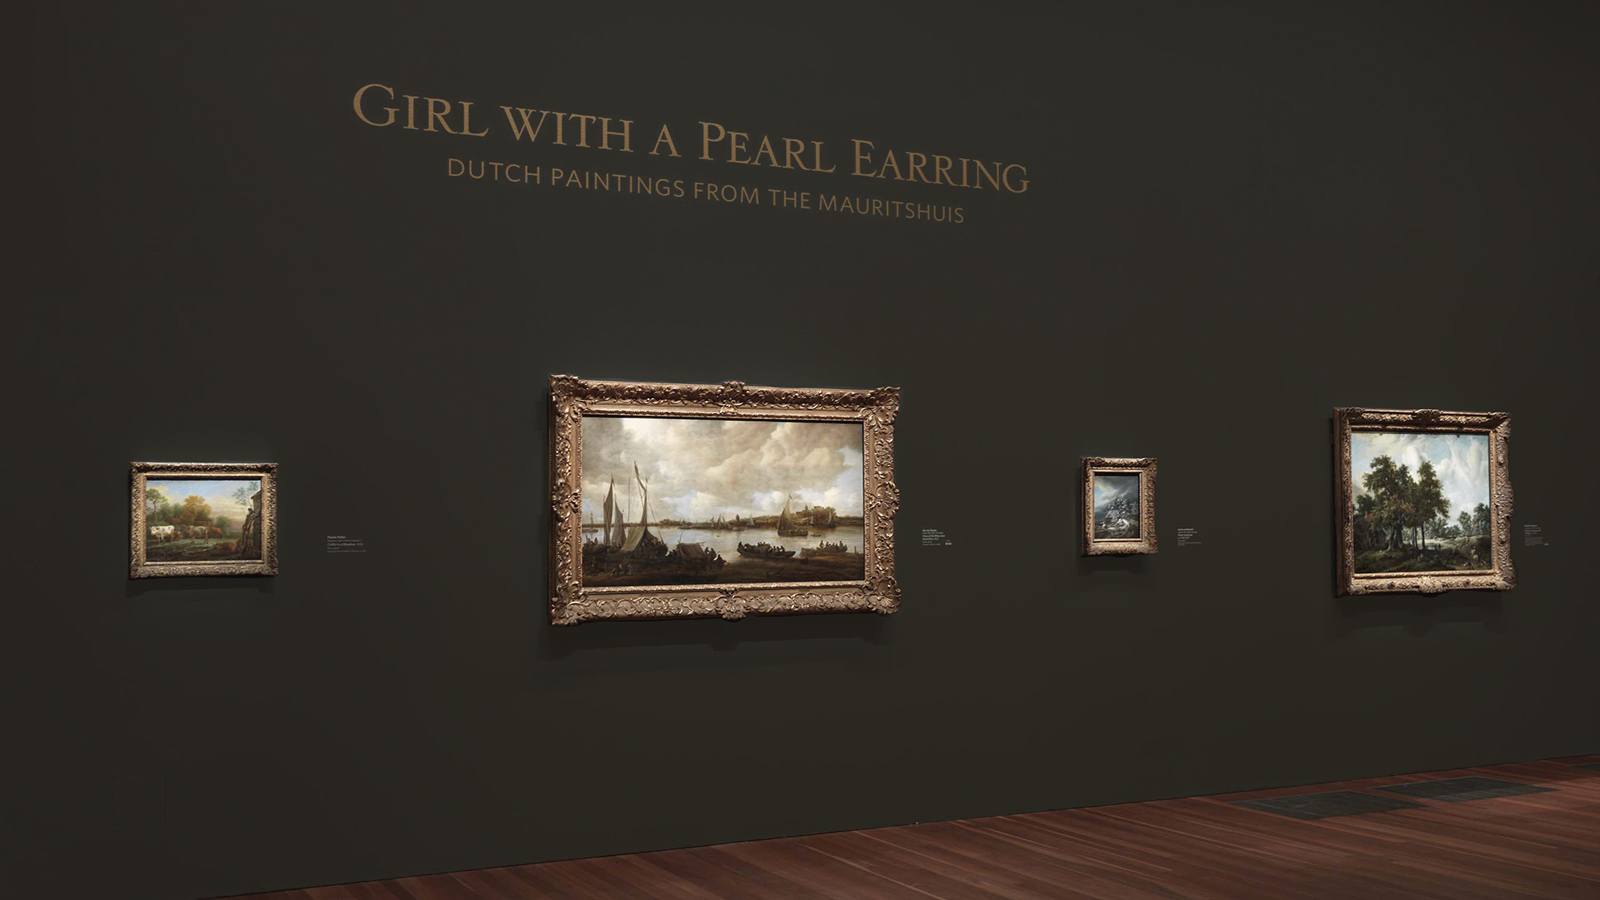 A view of the deYoung gallery in San Fransisco, the Girl with the Pearl Earring art exhibit using custom dry transfers on walls for artwork labels and painting descriptions.